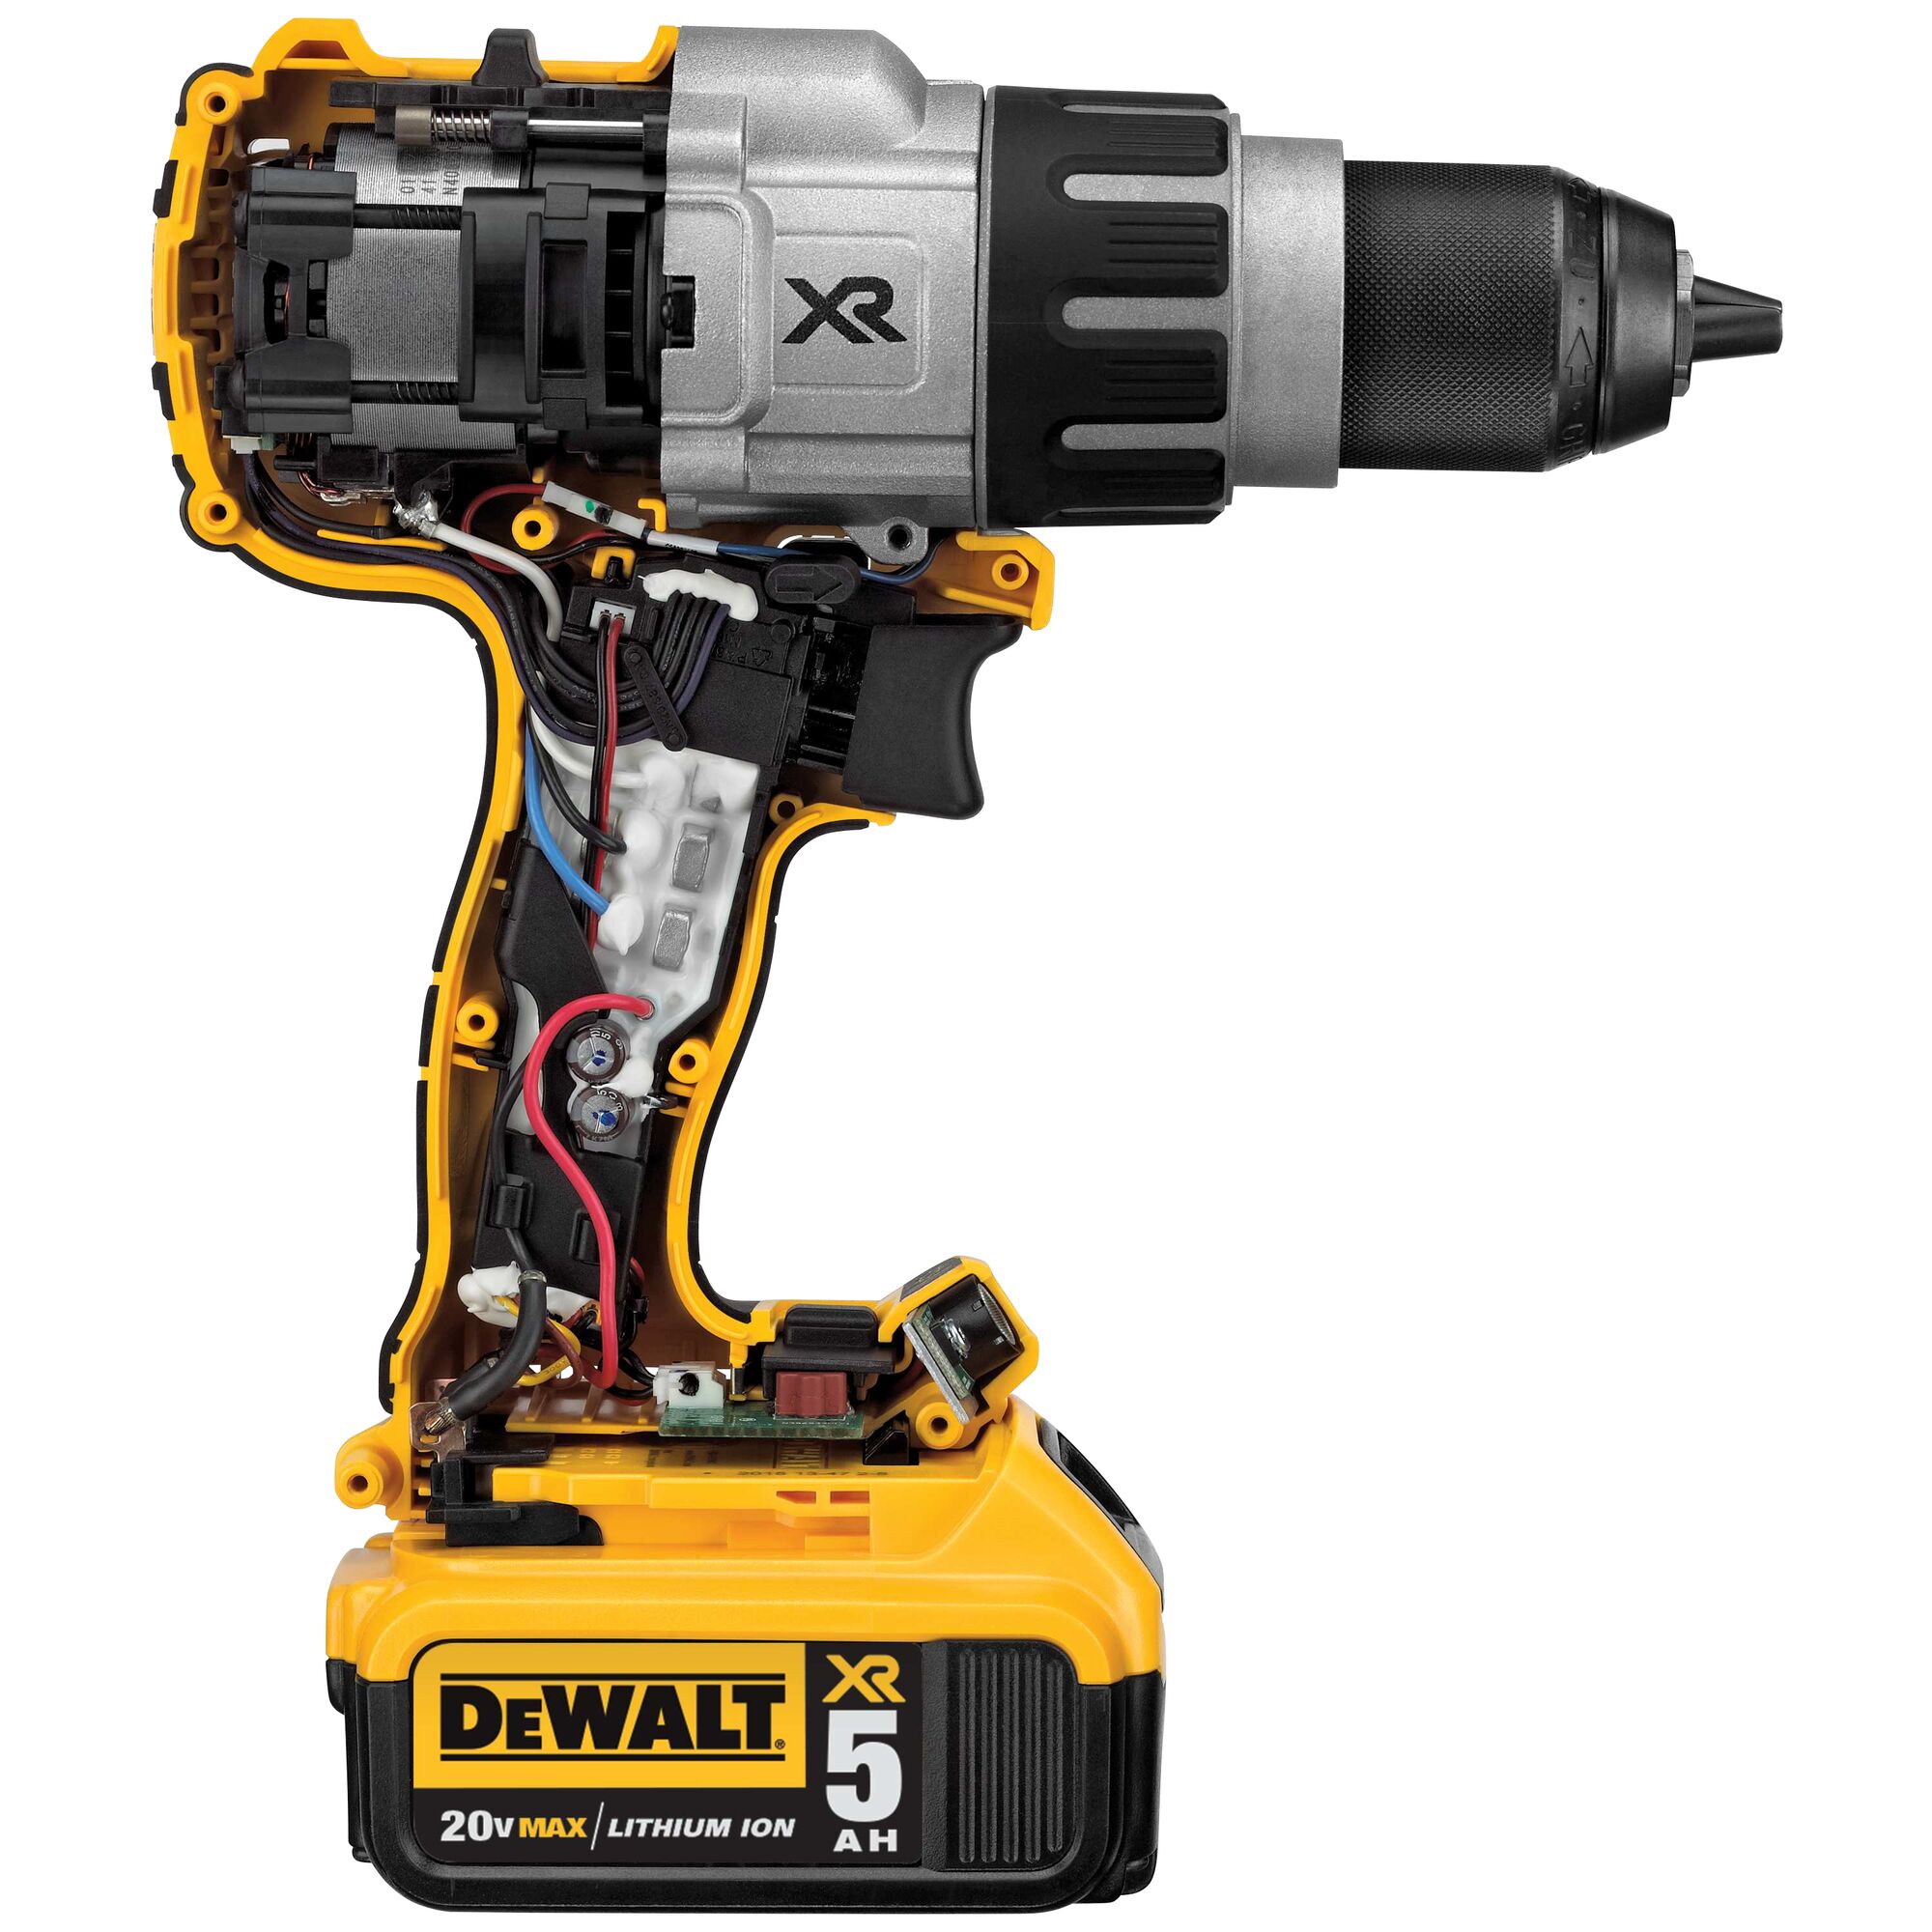 DEWALT 20V MAX XR DCD996 Brushless 3-Speed Hammer Drill FOR PARTS NOT WORKING 